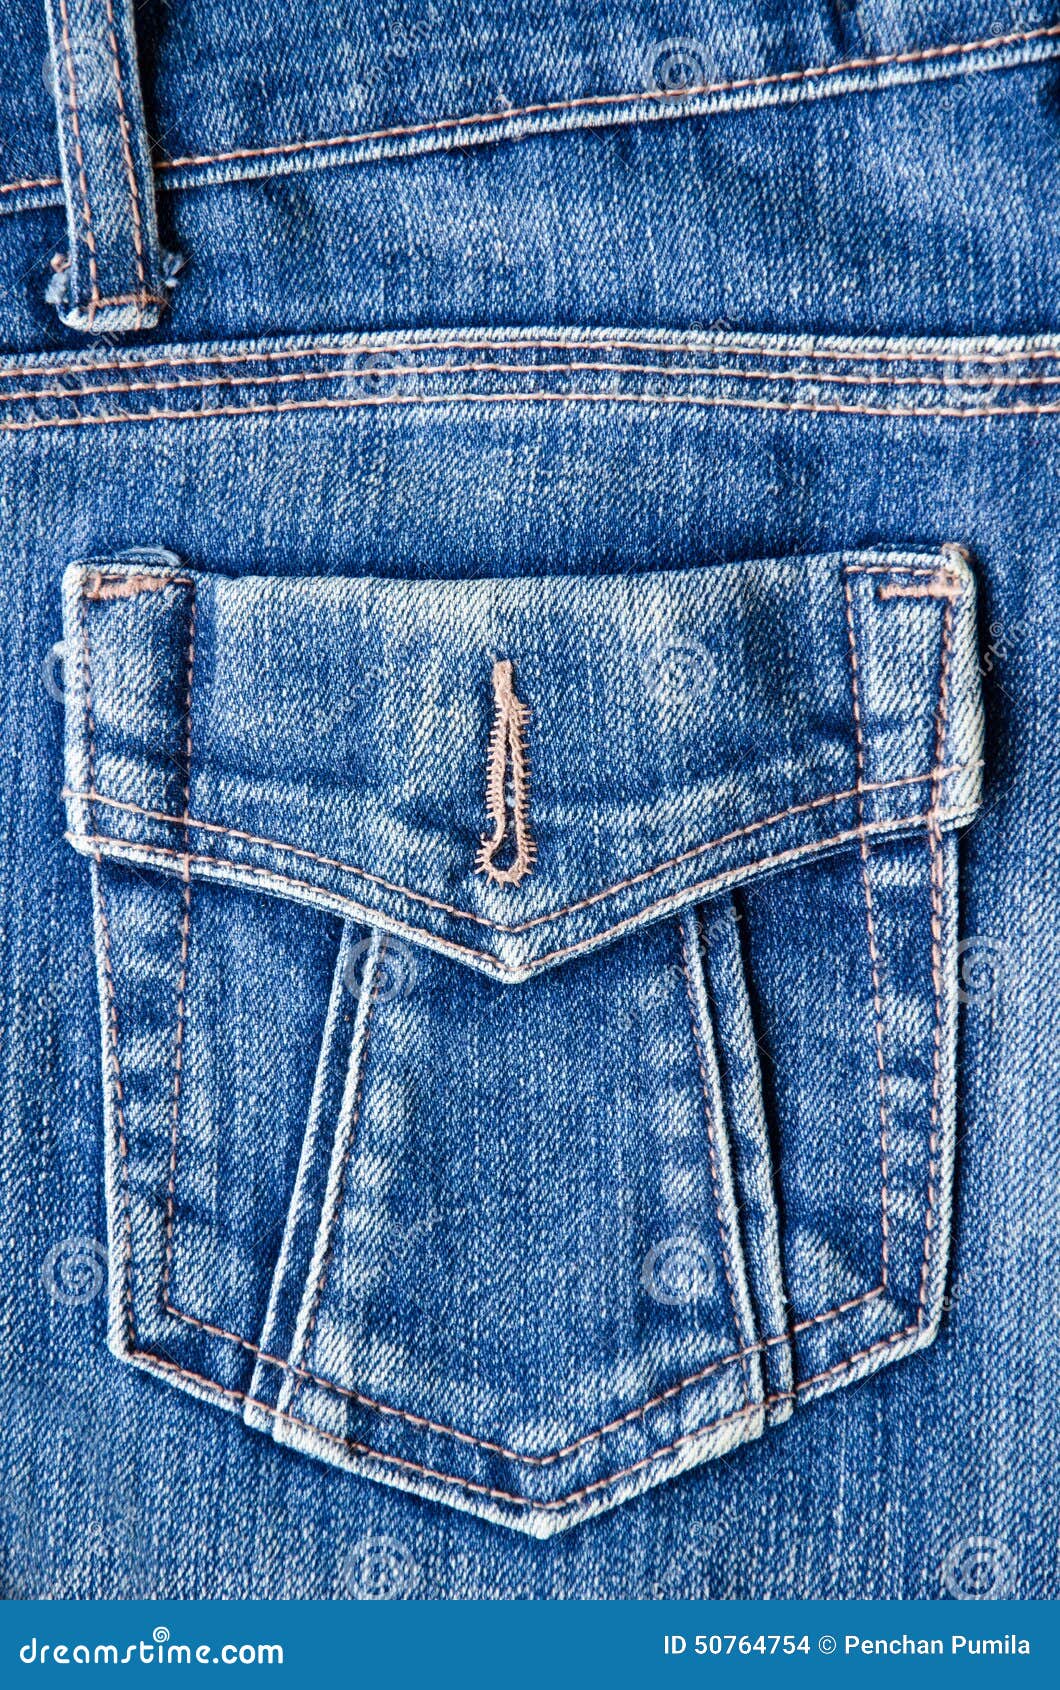 Blue jeans pocket. stock photo. Image of detail, clothes - 50764754